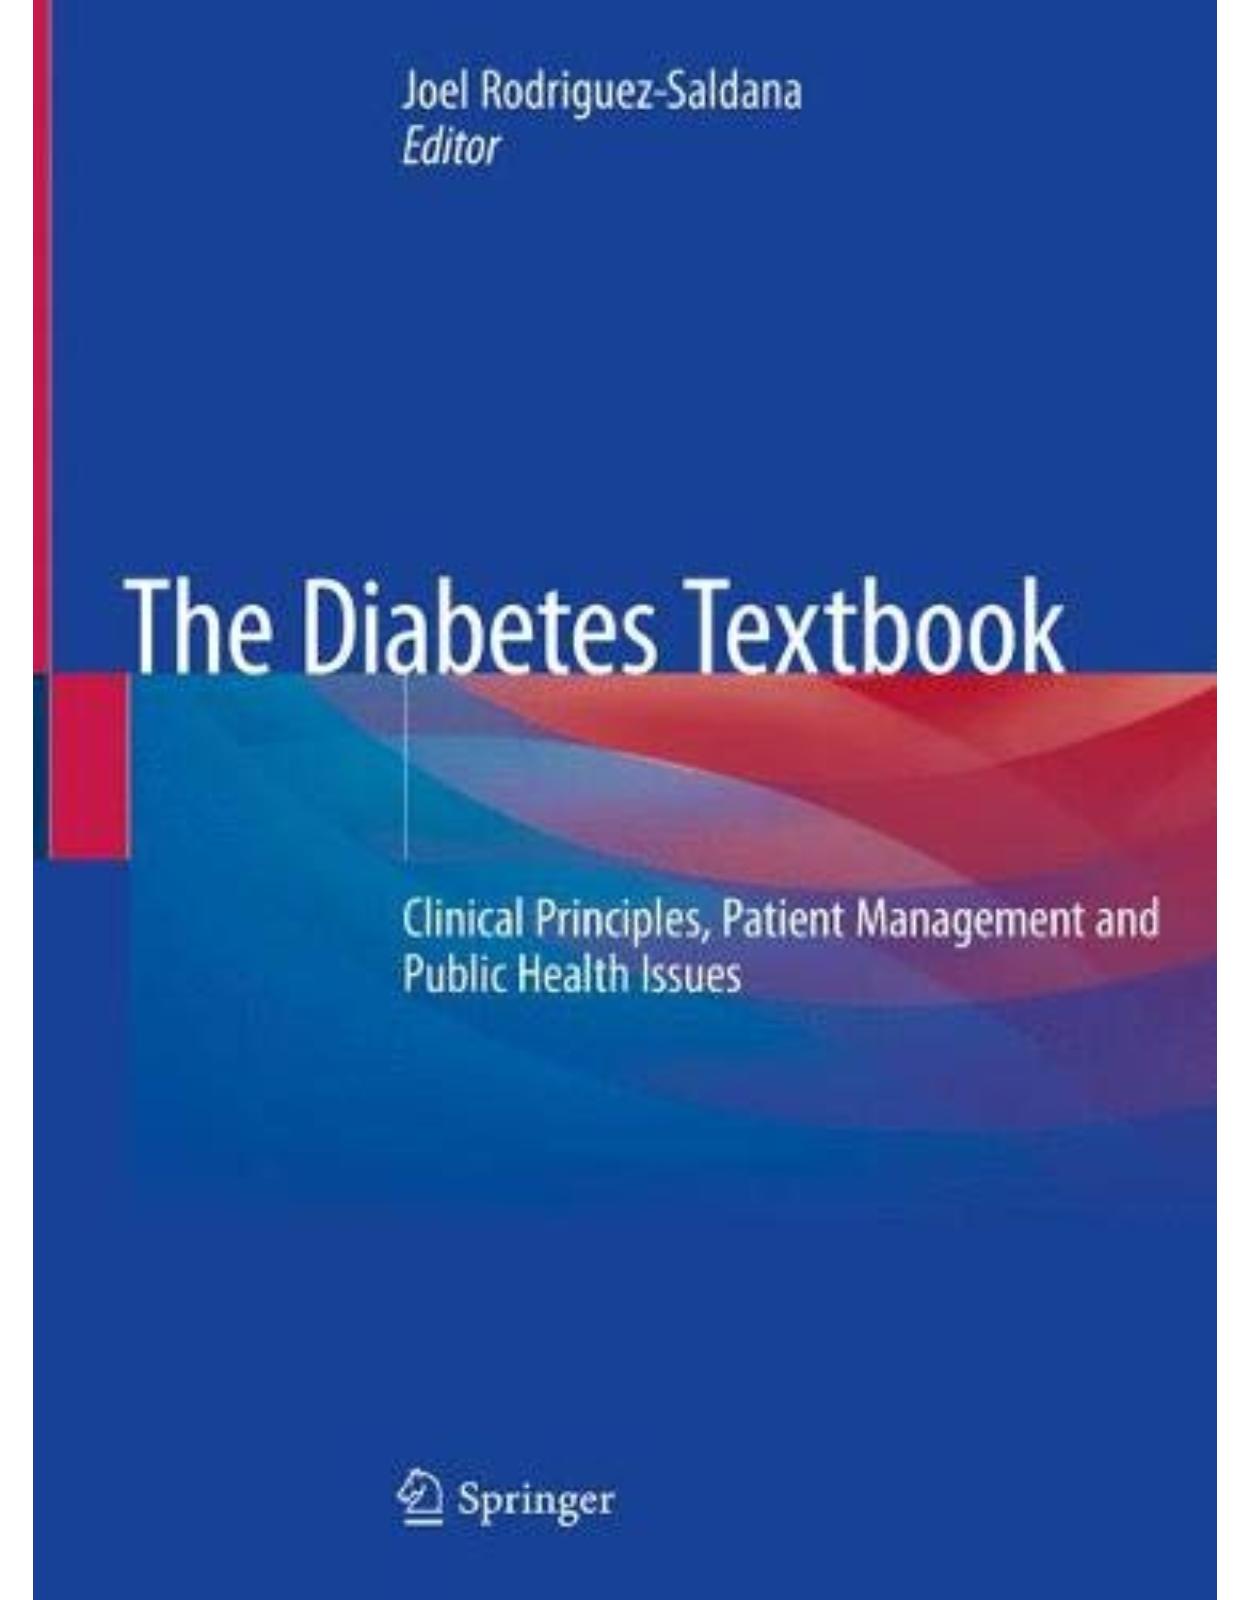 The Diabetes Textbook: Clinical Principles, Patient Management and Public Health Issues